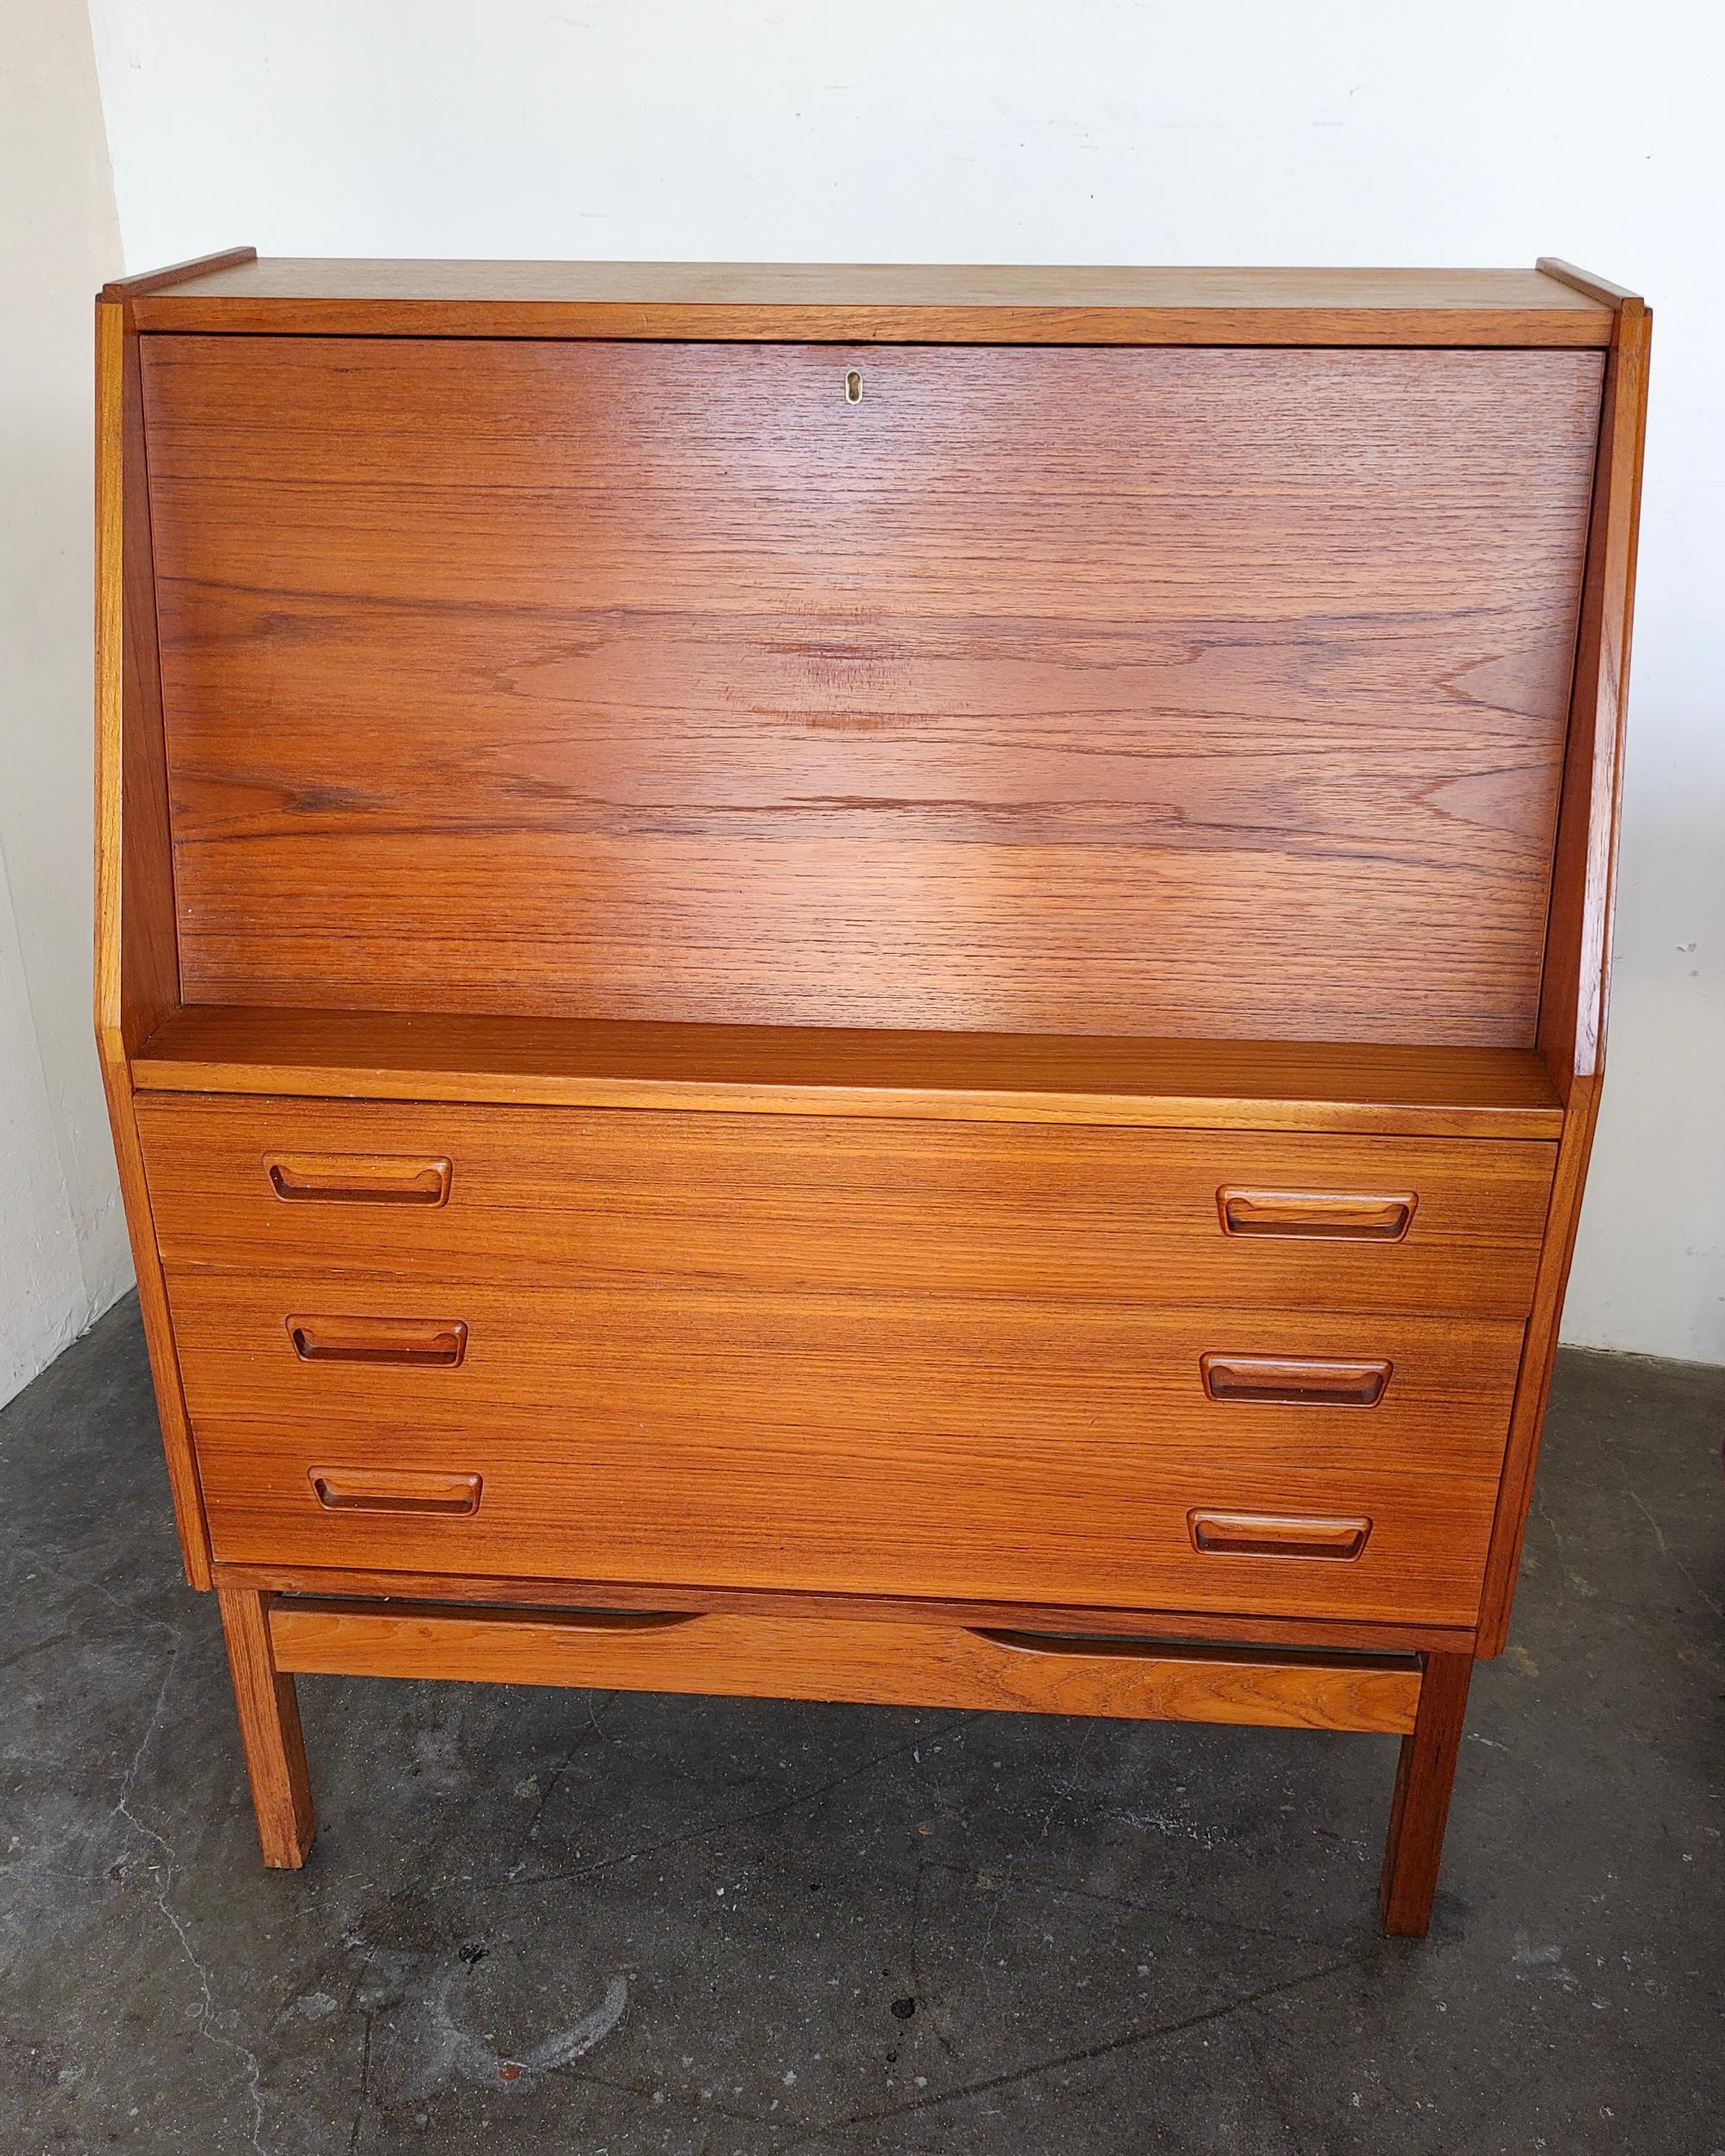 Drop-down teak secretary desk with three drawers by Dyrlund. Beautiful recessed solid teak handles, dovetail joinery and key pull for opening up the desk. Top opens up to envelope cubbies and two small sundry drawers. Great overall condition, there